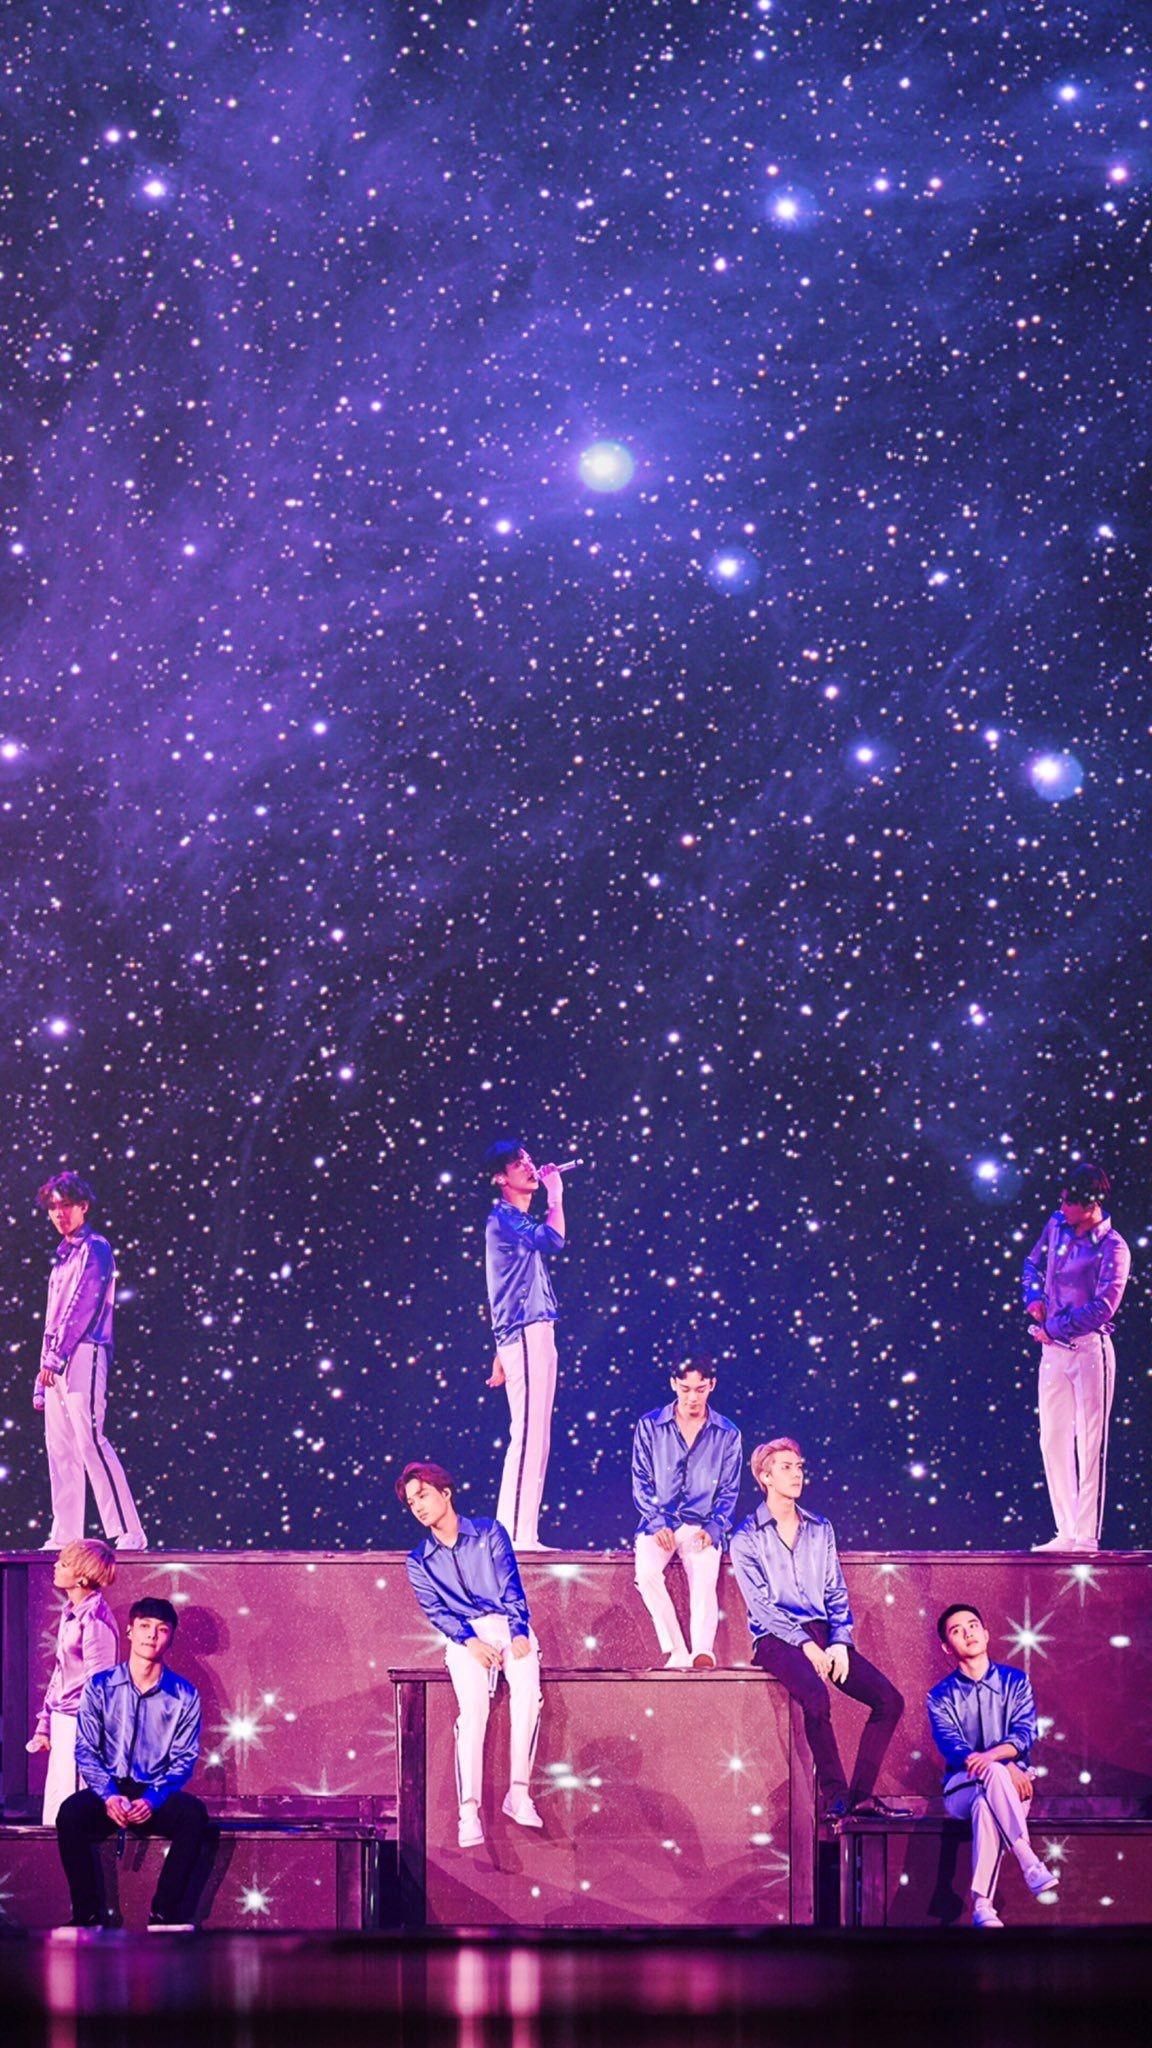 We Are One EXO Wallpapers - Wallpaper Cave